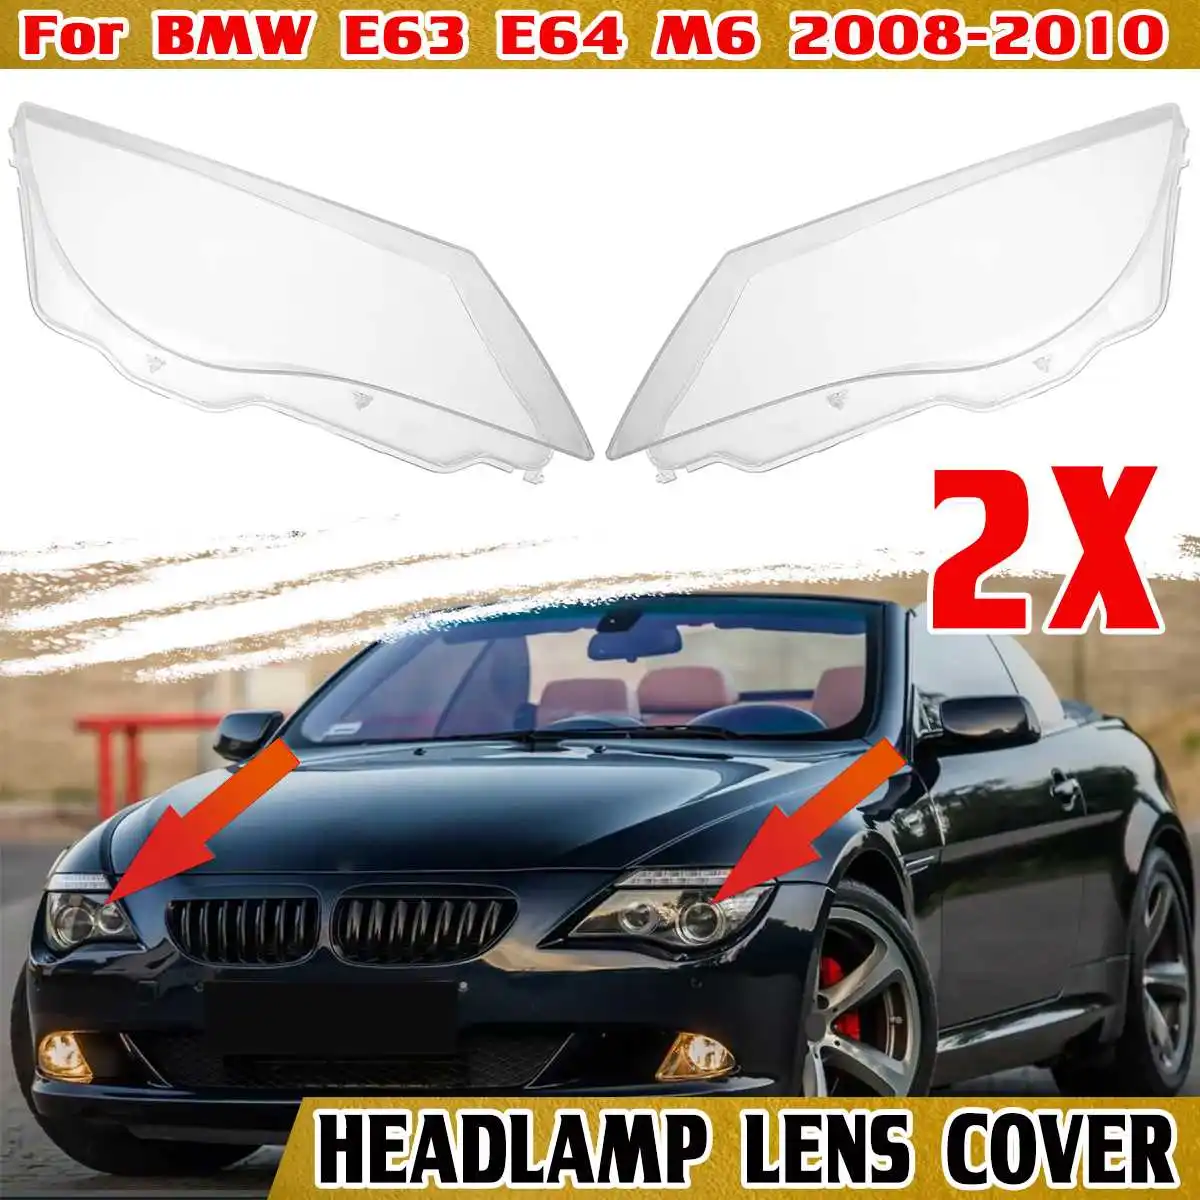 Clear Headlight Lens Cover Replacement Left & Right For BMW E63 E64 M6 2008-2010 